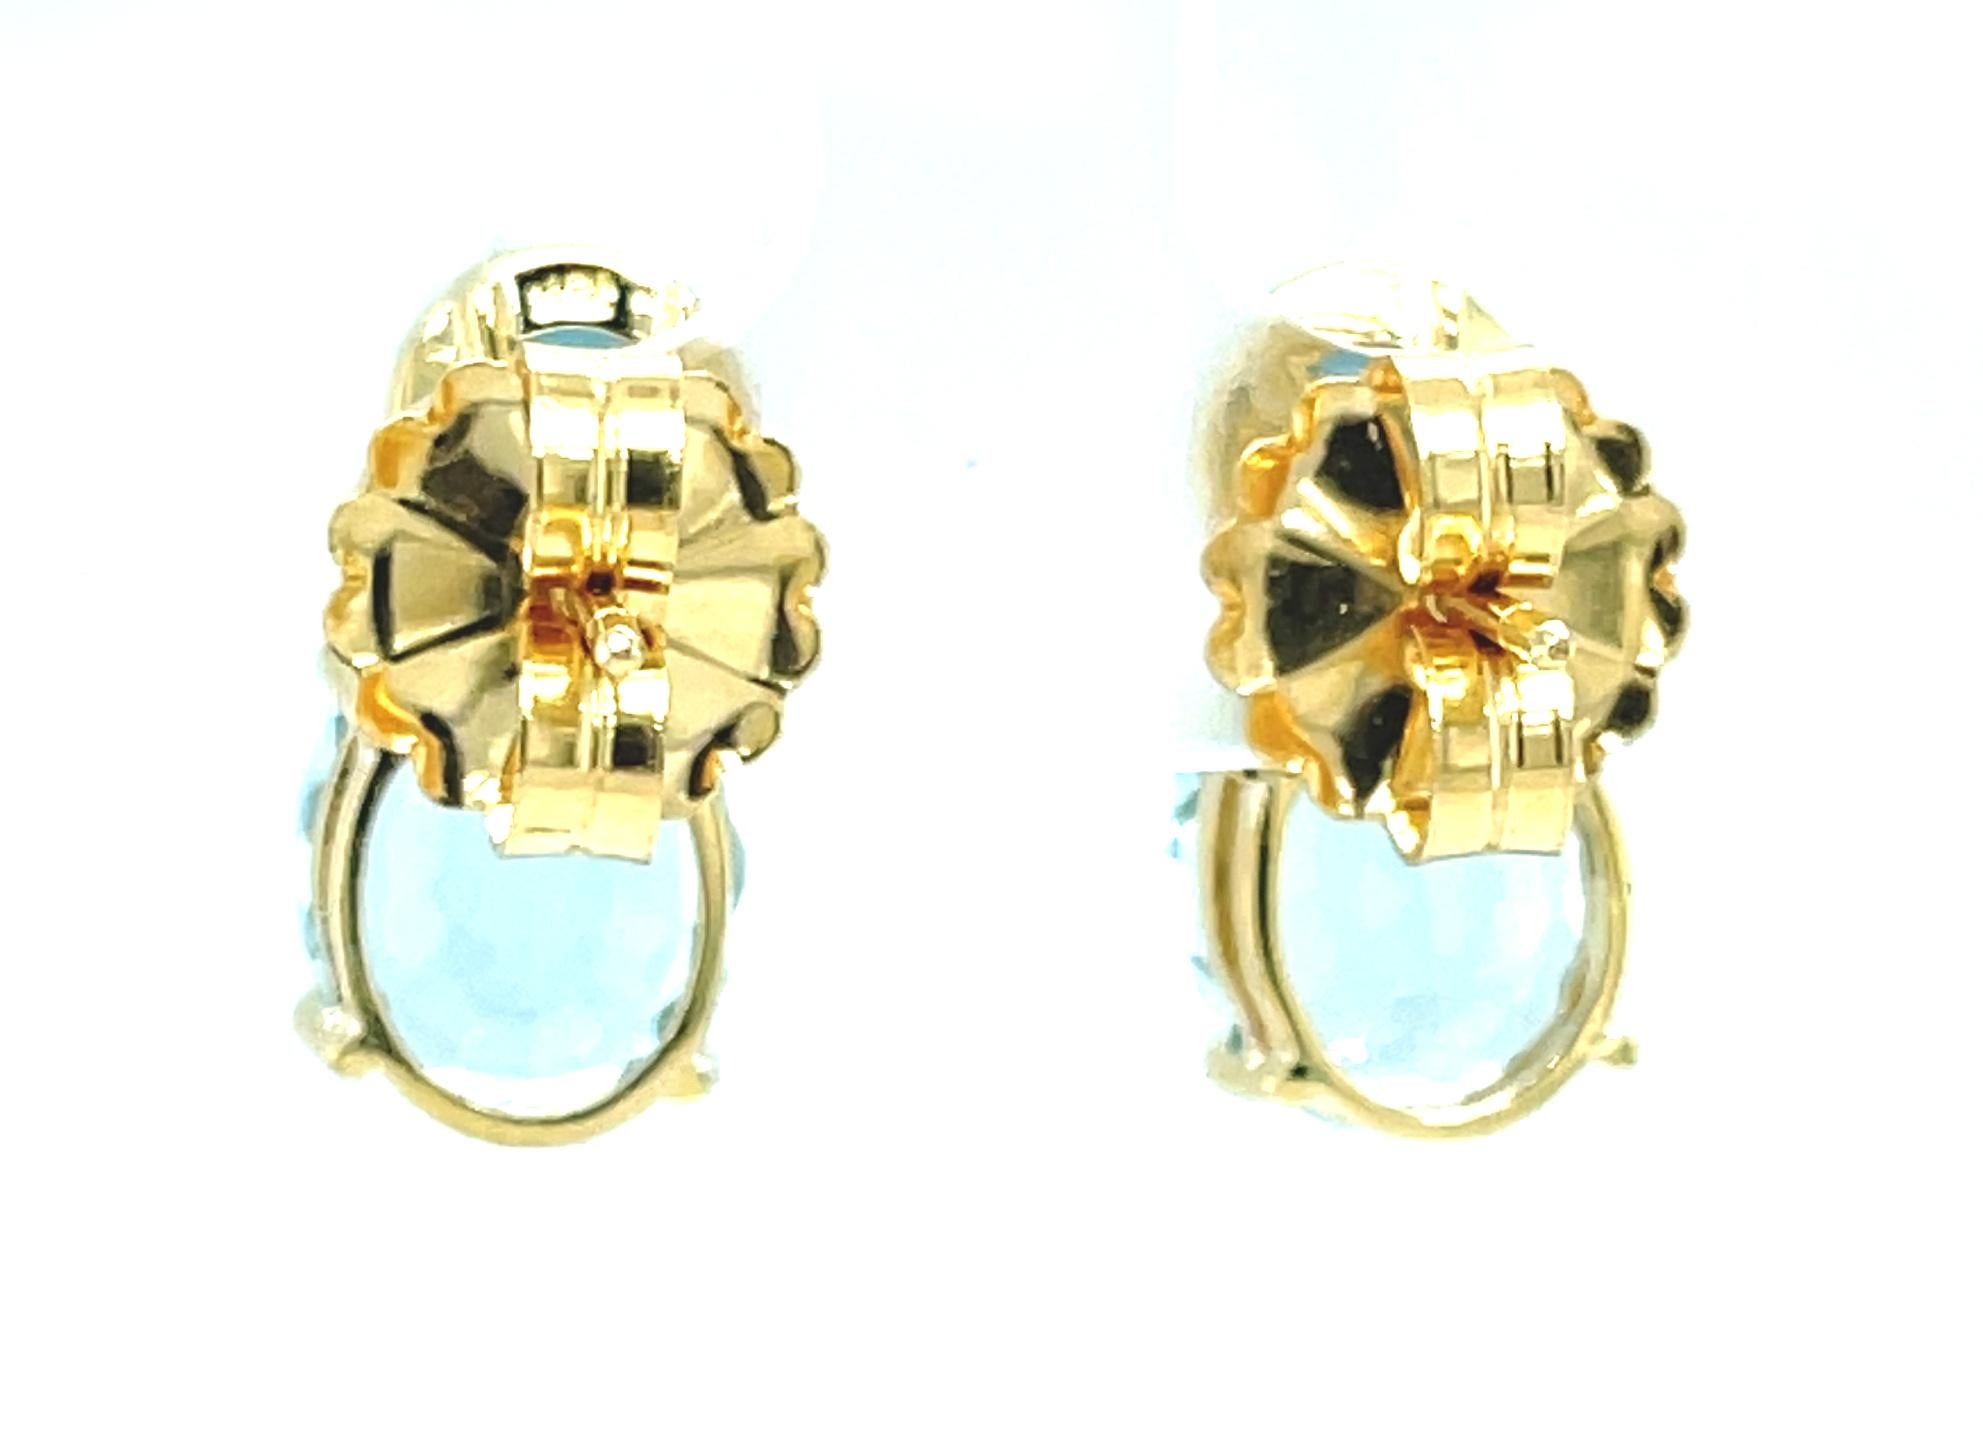  Aquamarine Drop Earrings in 18k Yellow Gold  For Sale 1